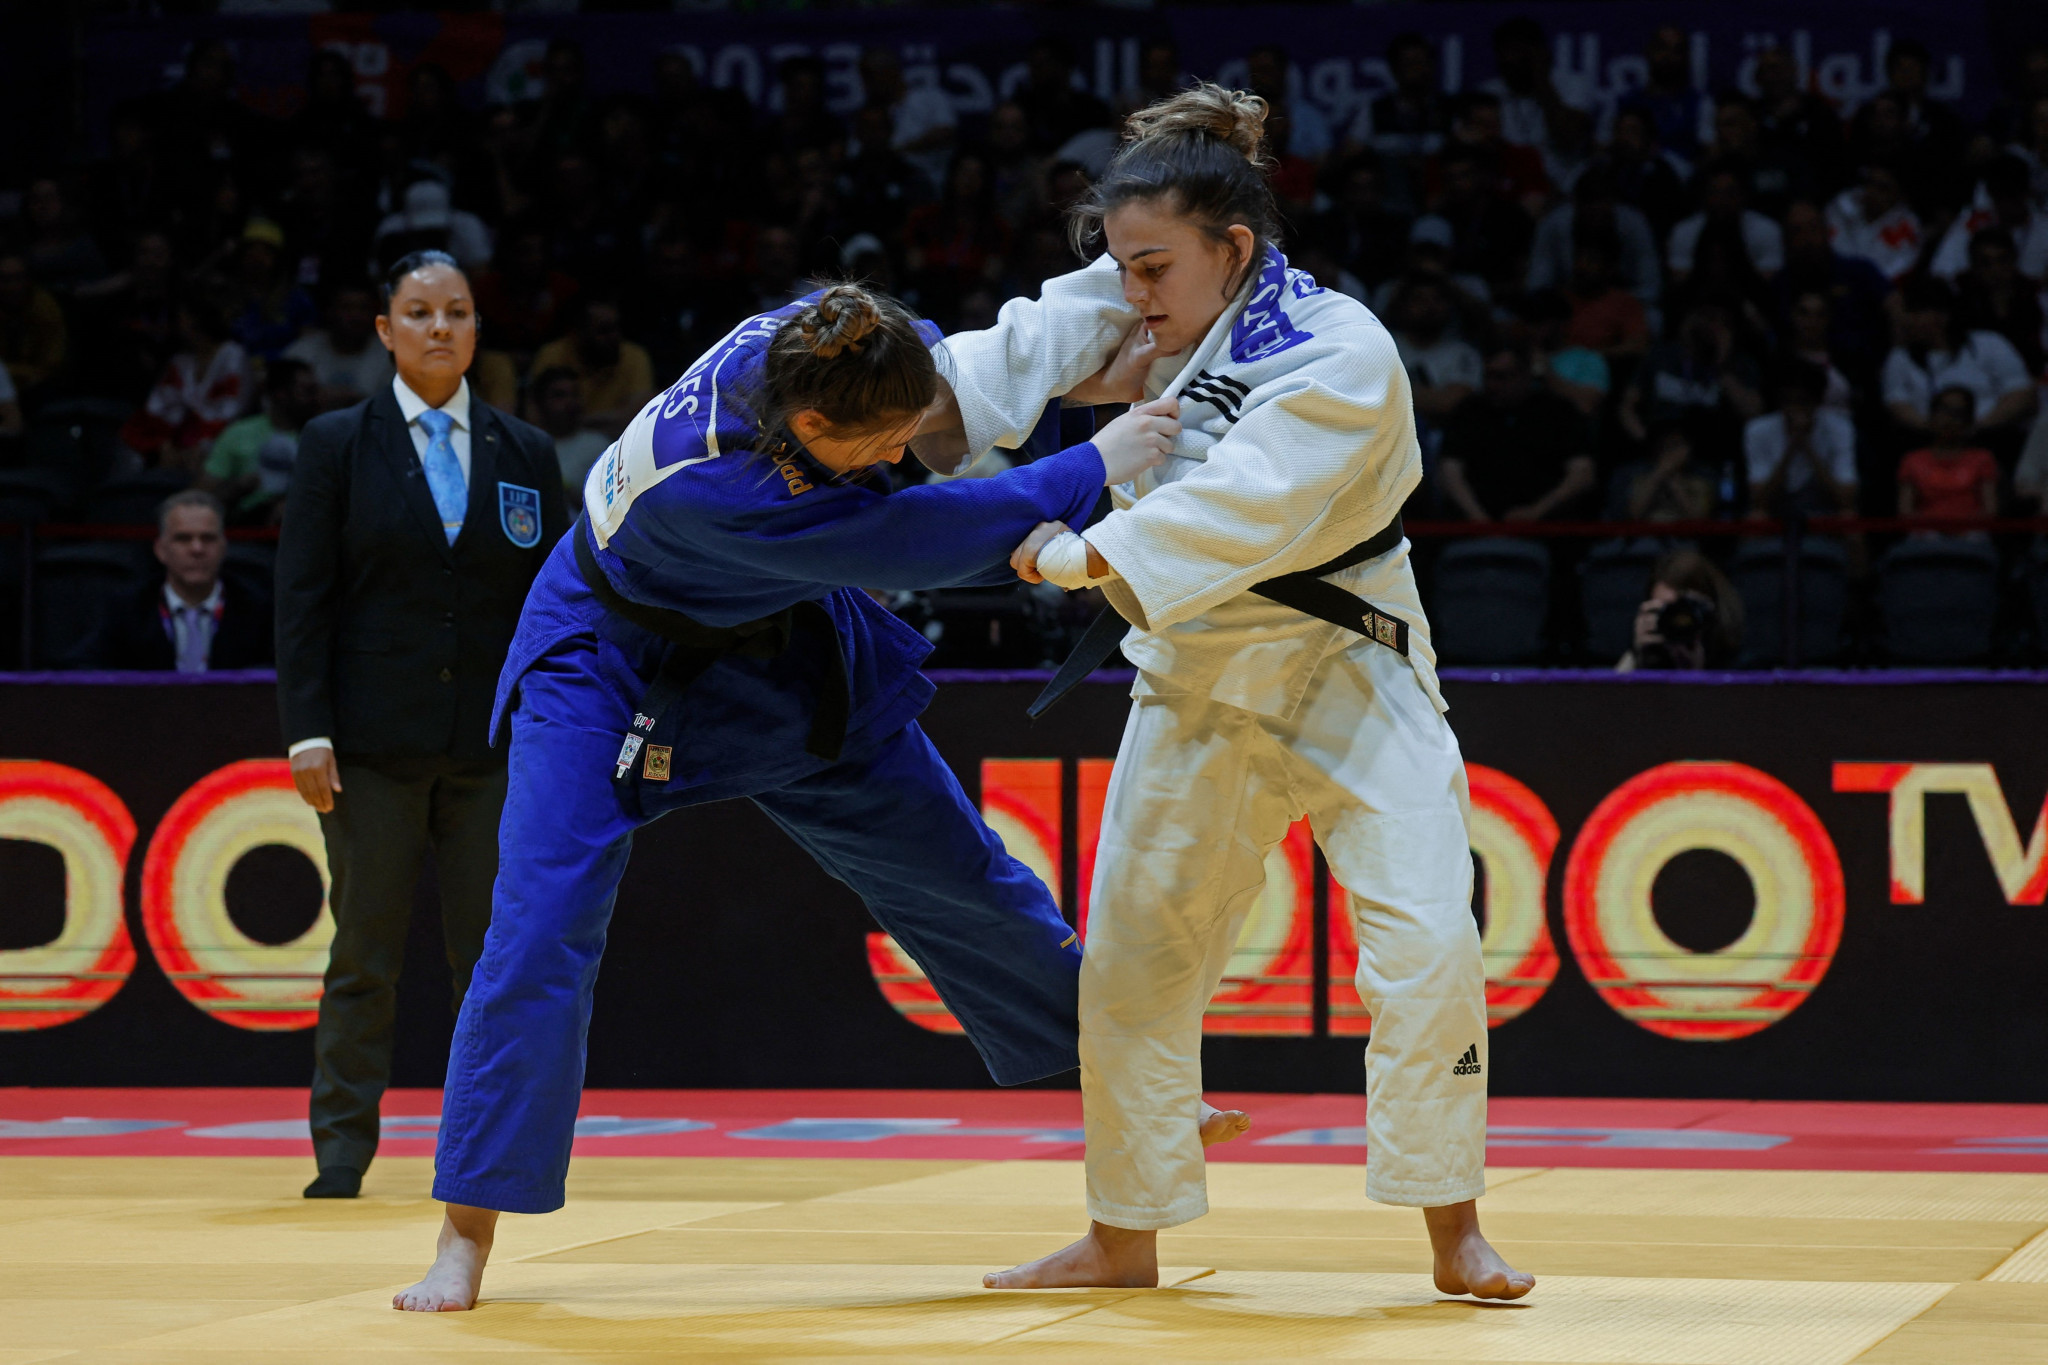 insidethegames is reporting LIVE from the World Judo Championships